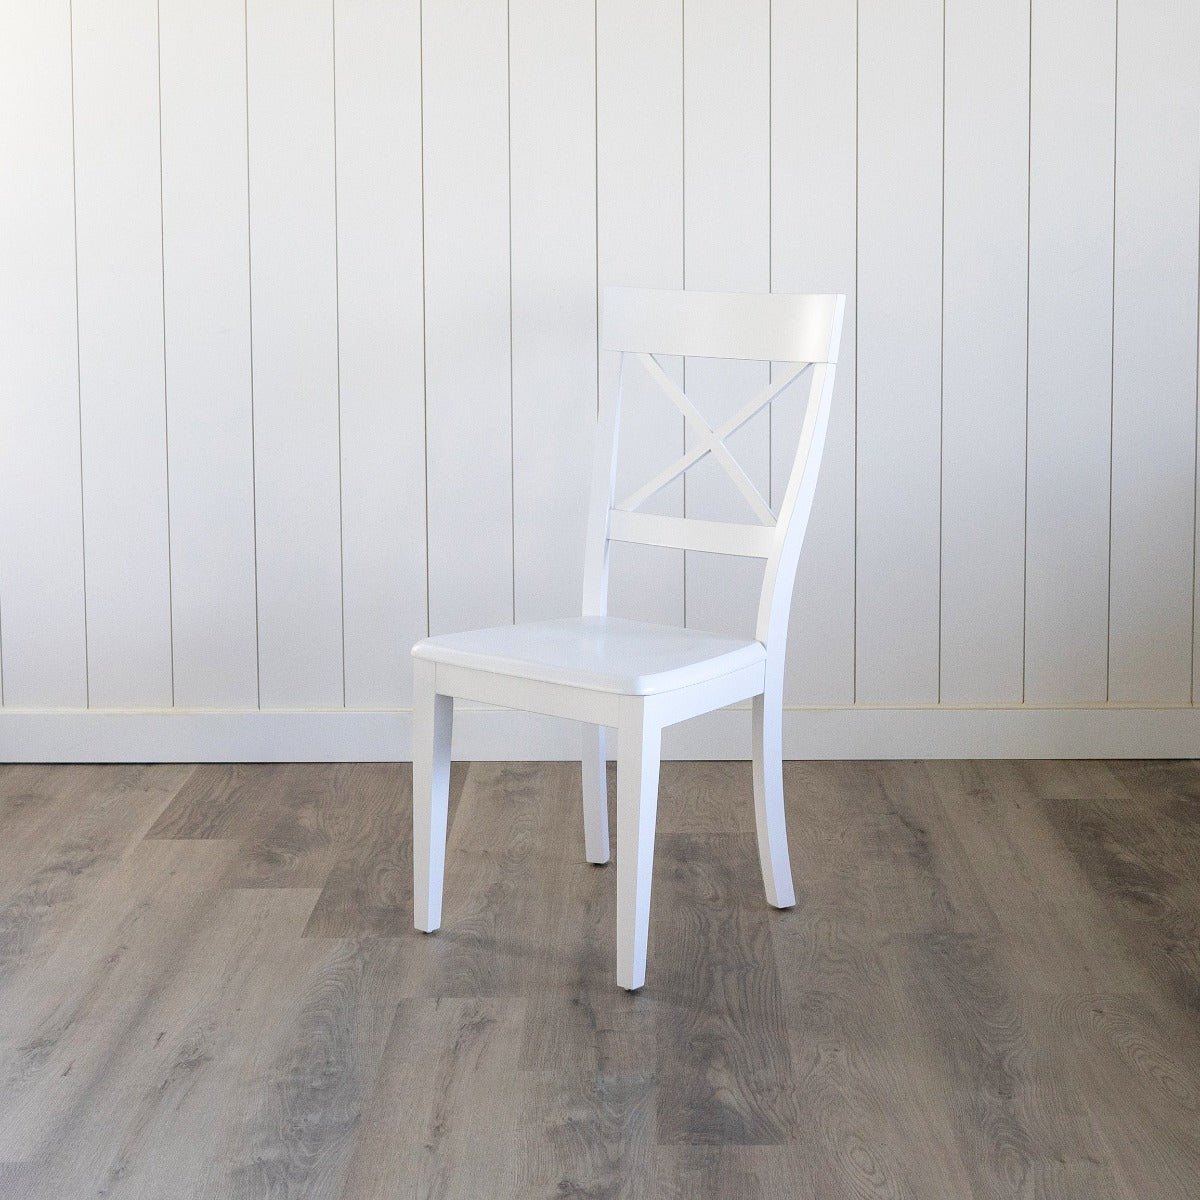 Kennedy Dining Chair in Opaque White. Front view. 